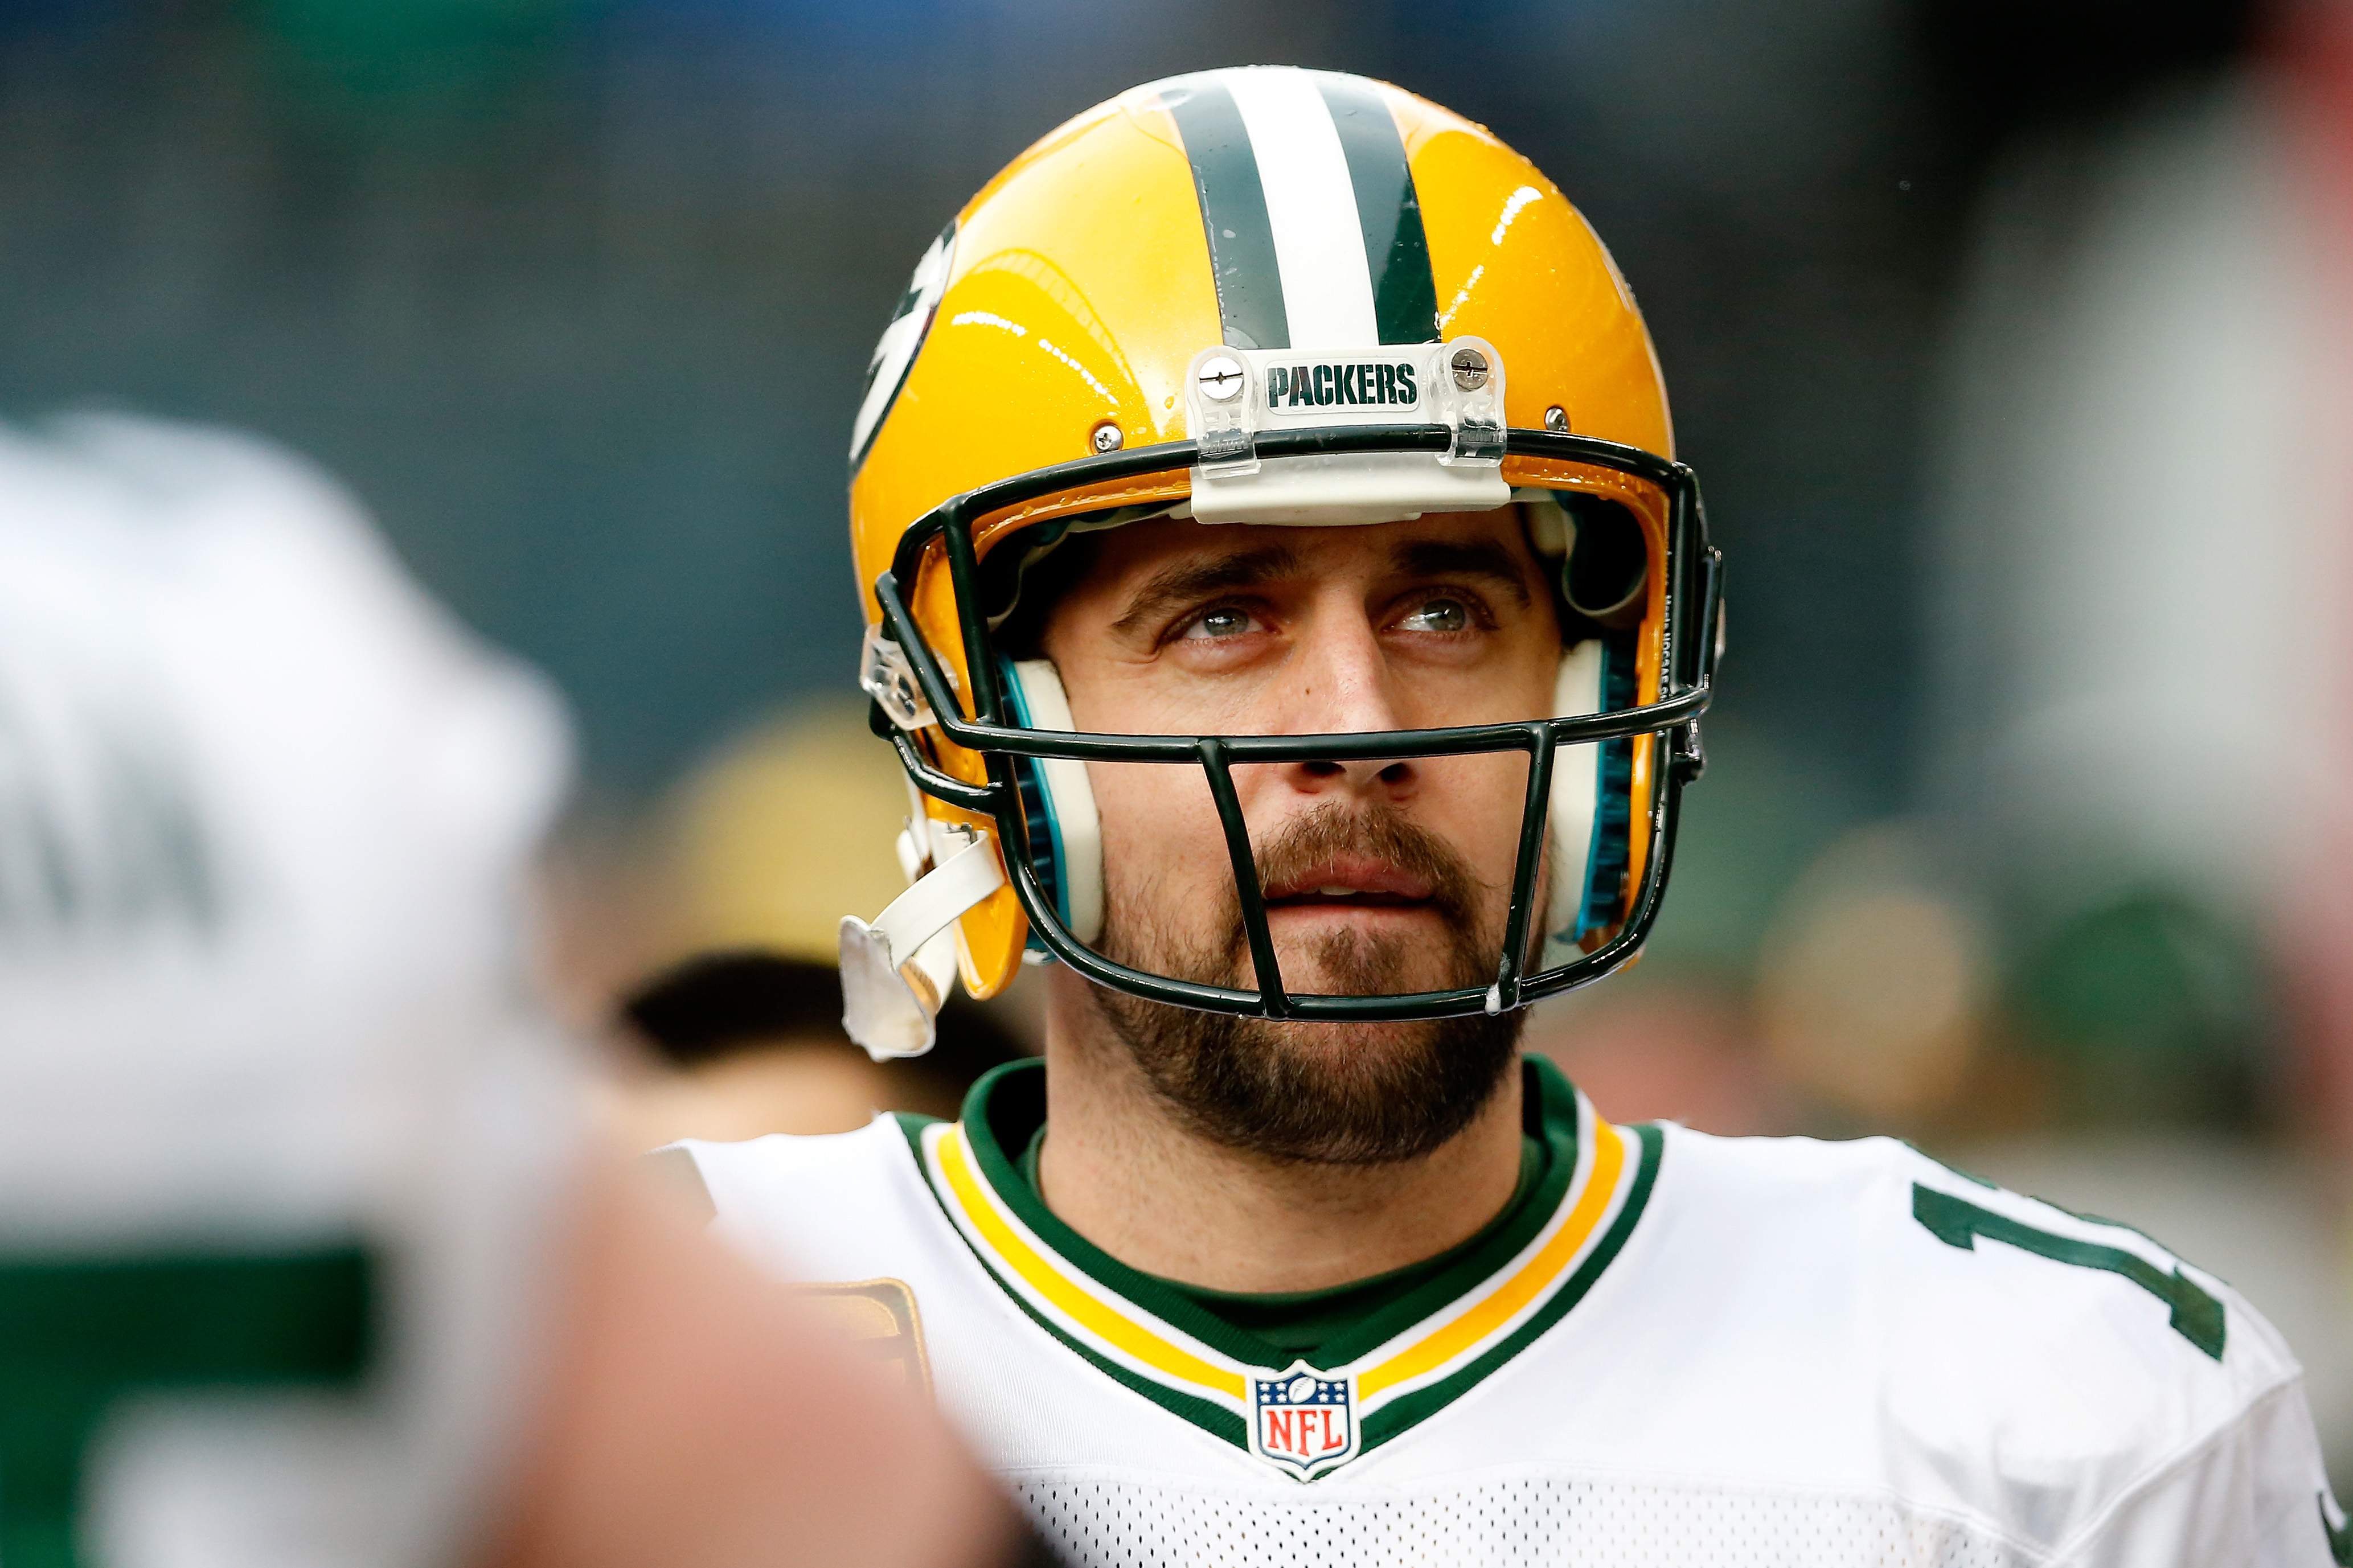 Aaron Rodgers of the Green Bay Packers looks up at the scoreboard during the fourth quarter of the 2015 NFC Championship game against the Seattle Seahawks at CenturyLink Field on Jan. 18, 2015 in Seattle.